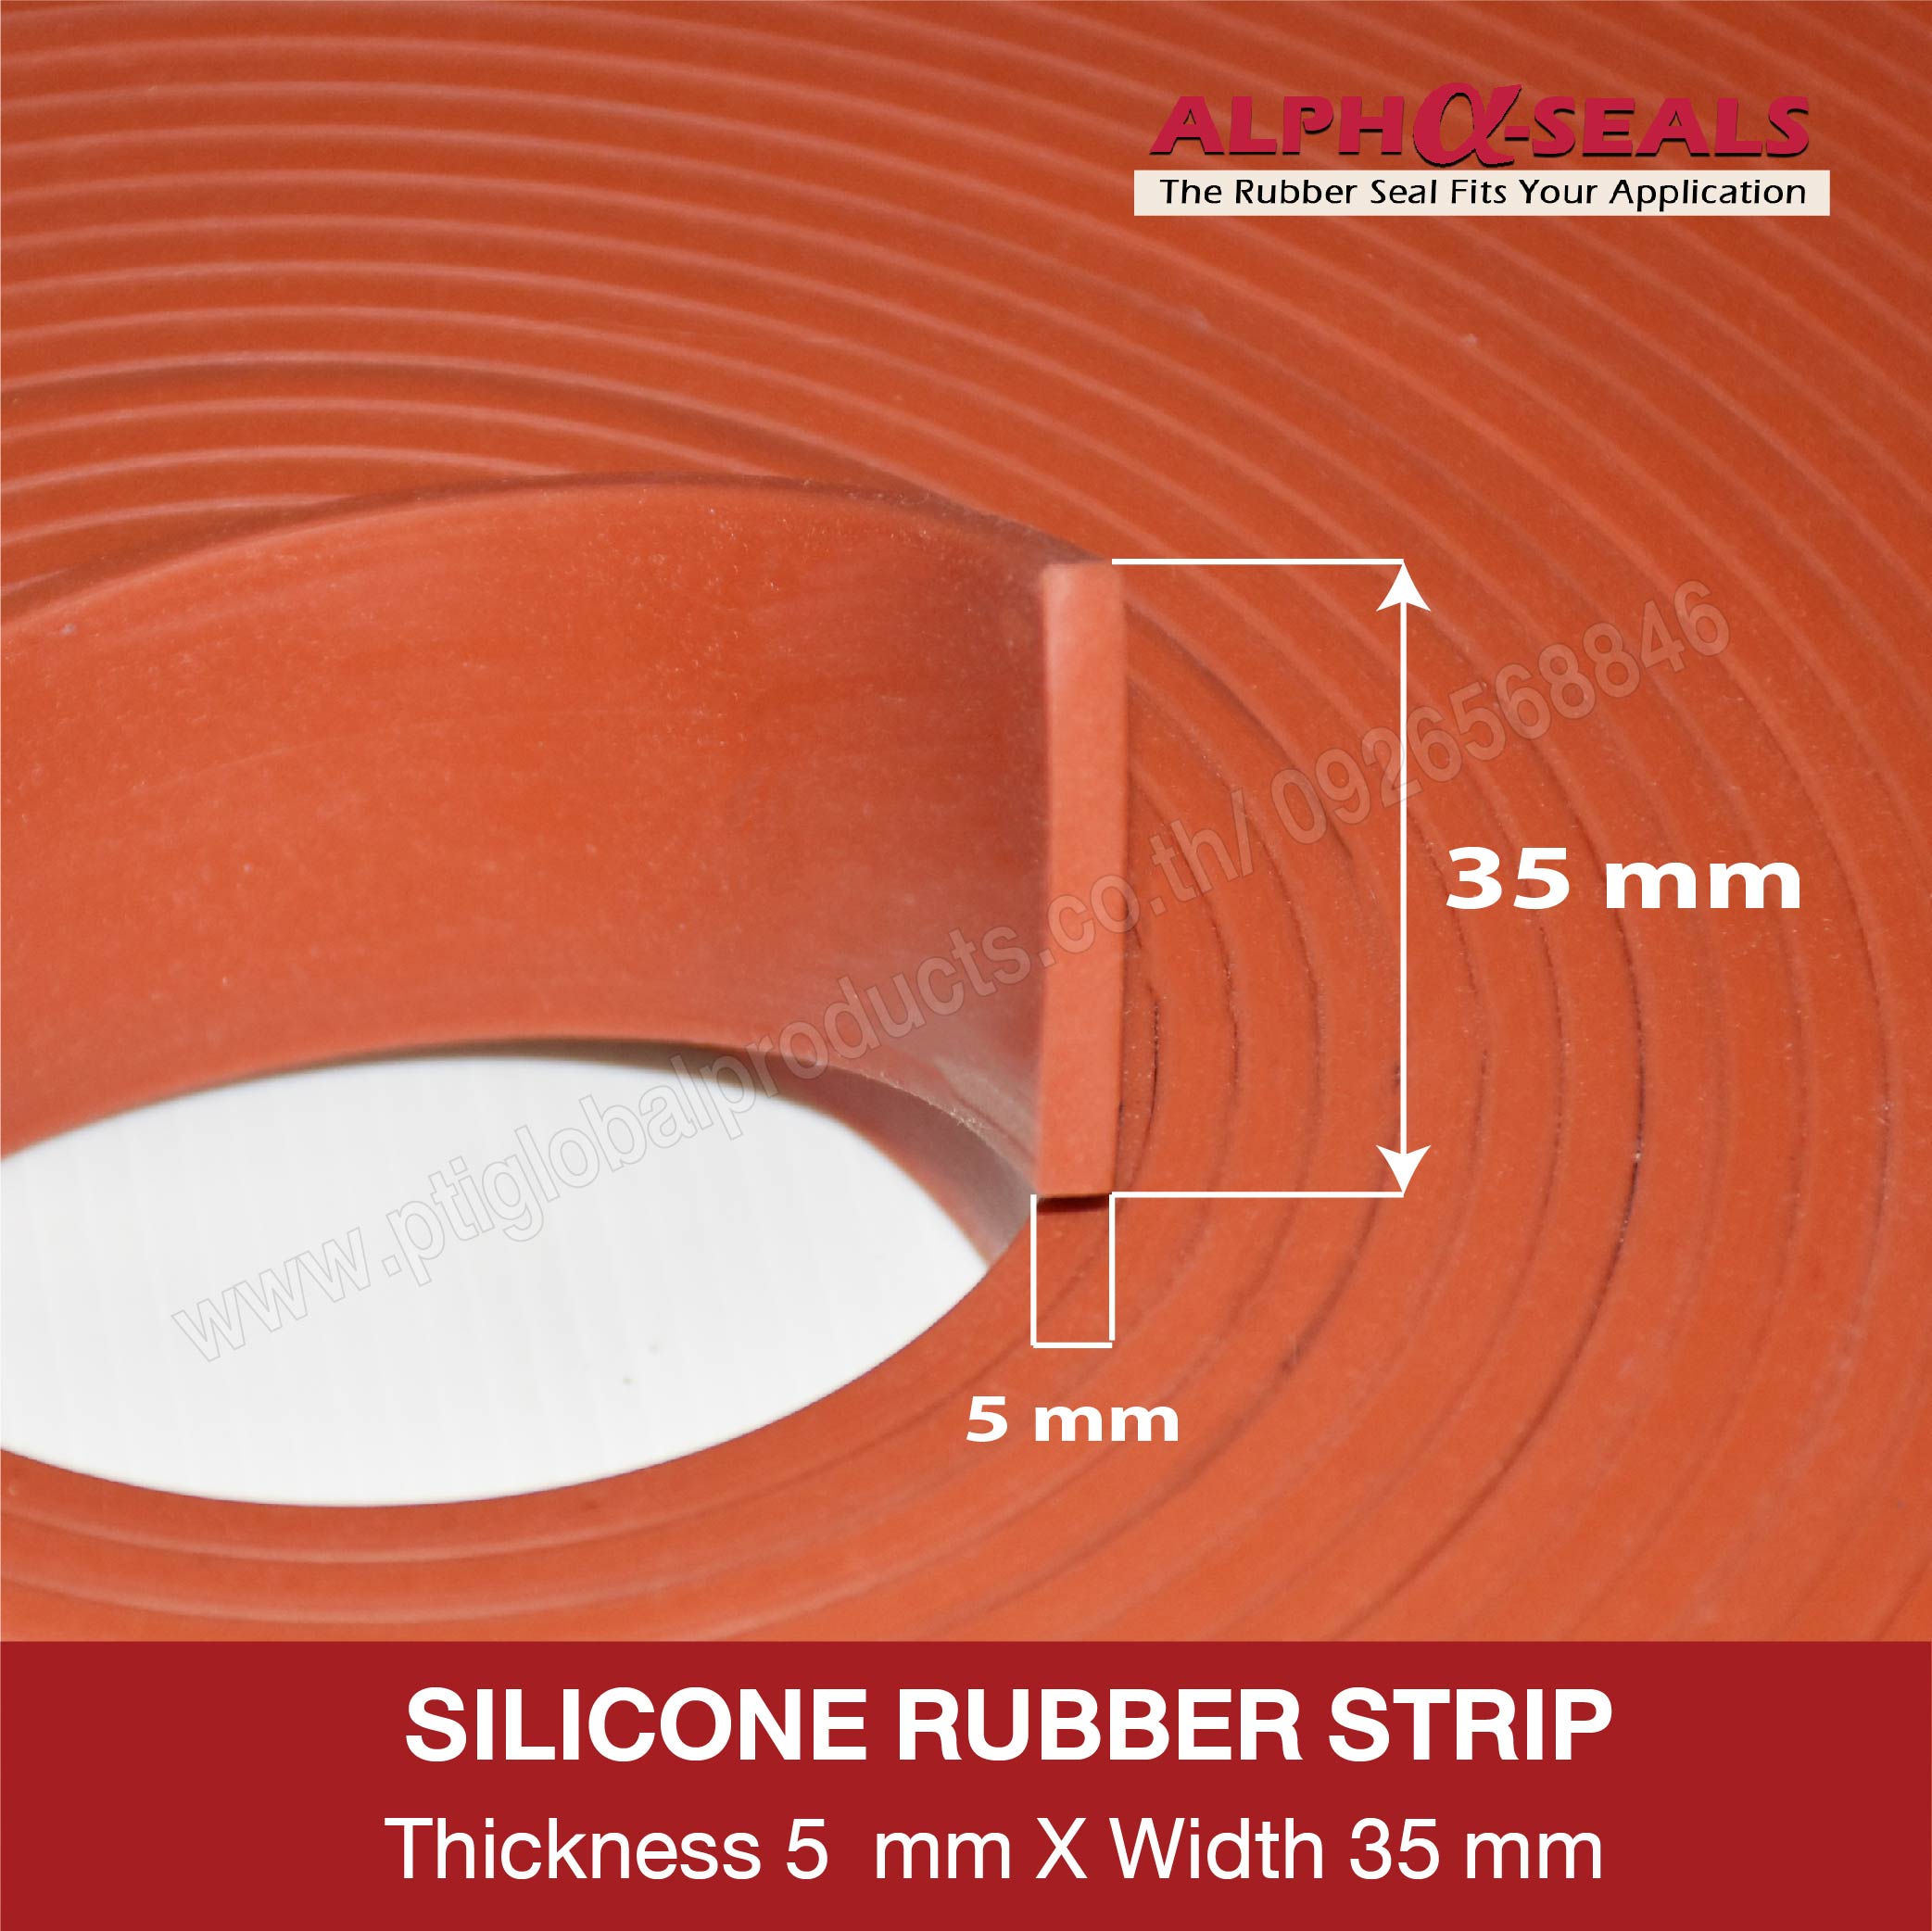 Square rubber seal 5x35 mm.